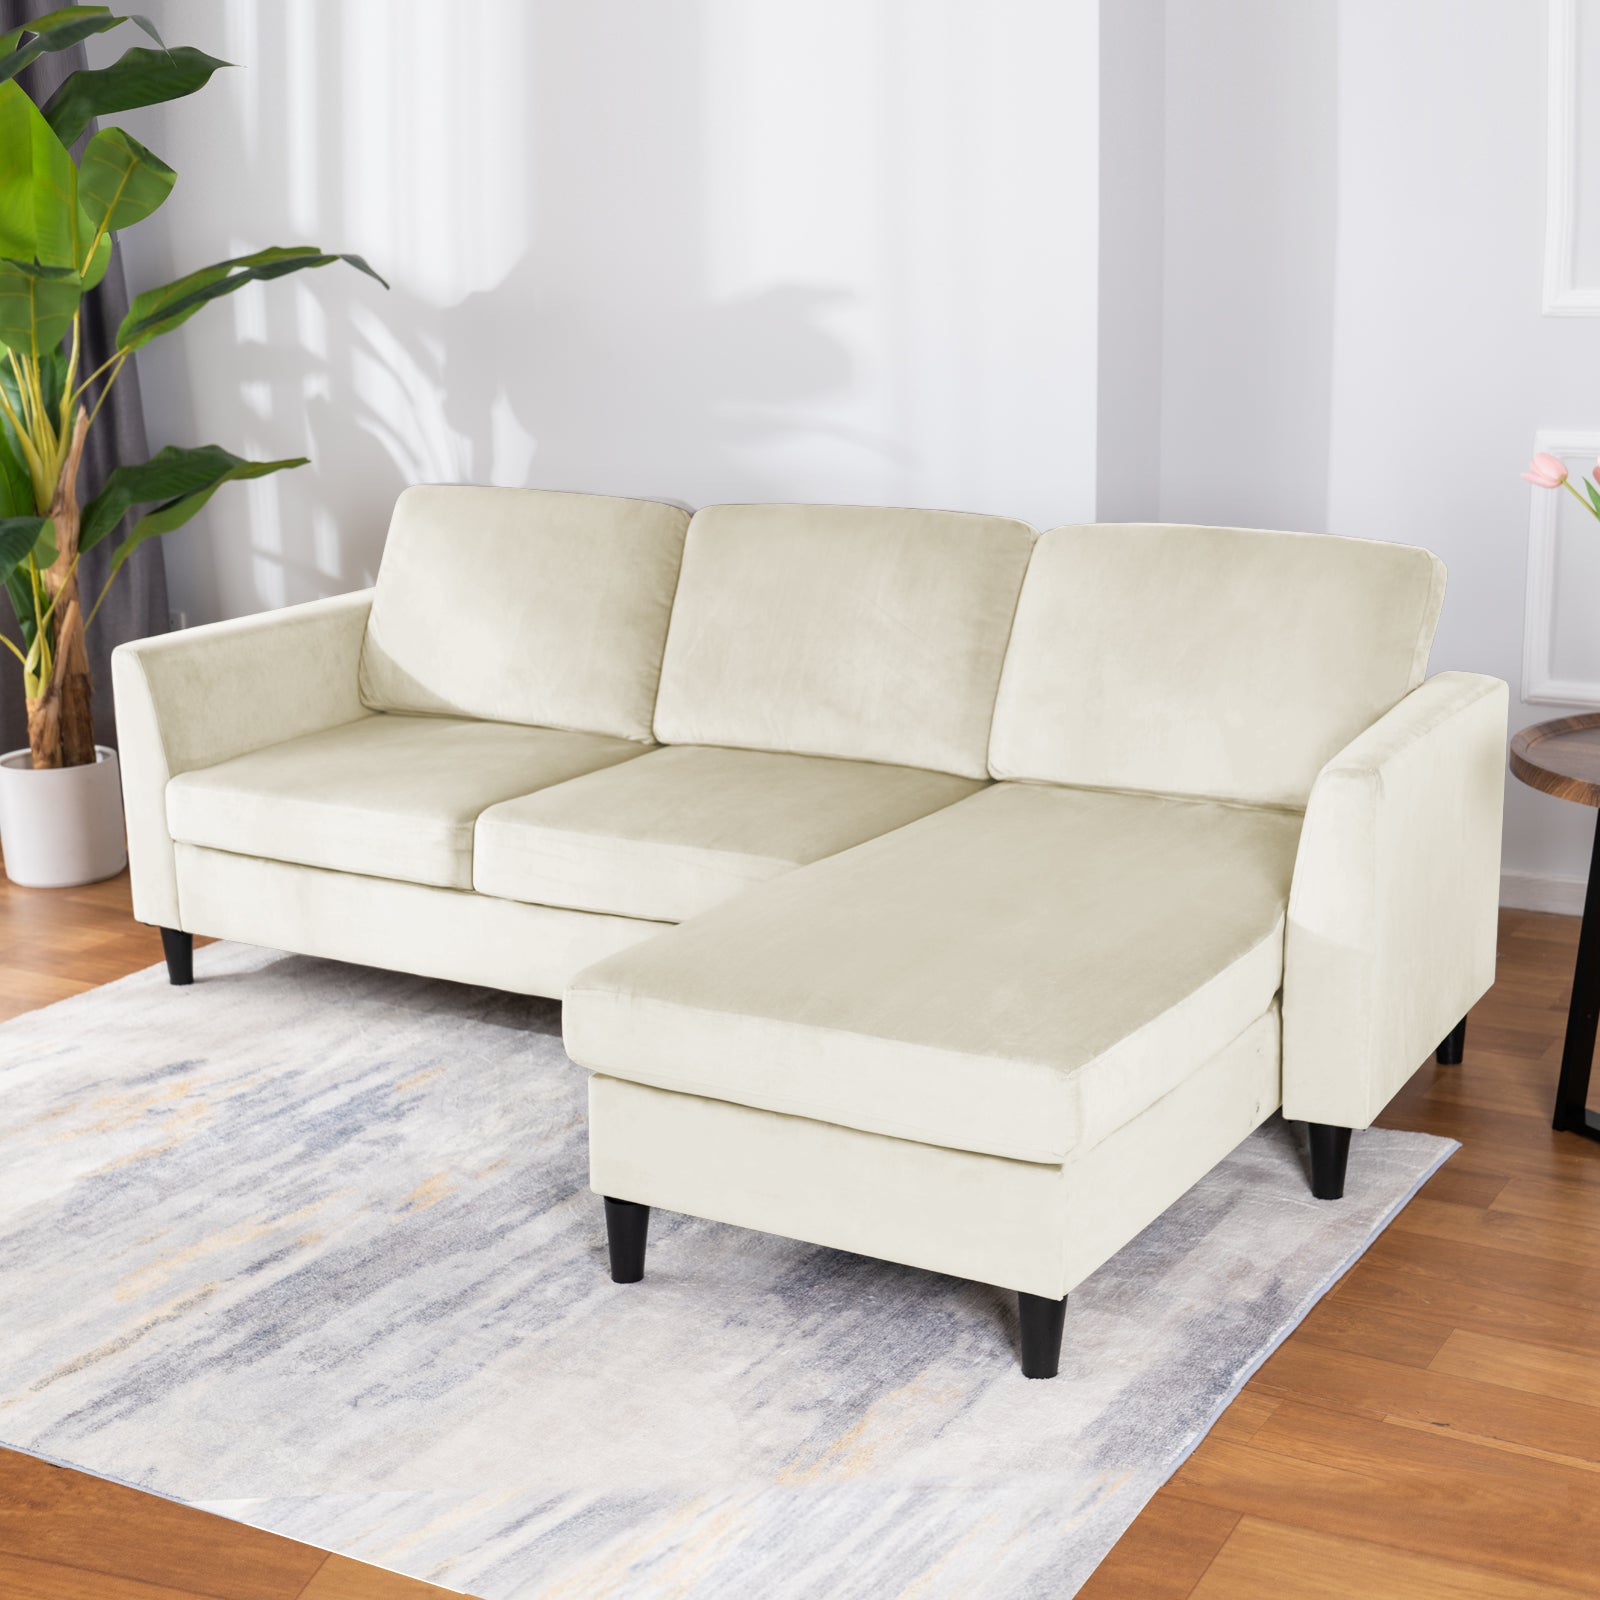 Mjkone L Shaped Modern Convertible Sectional Couch